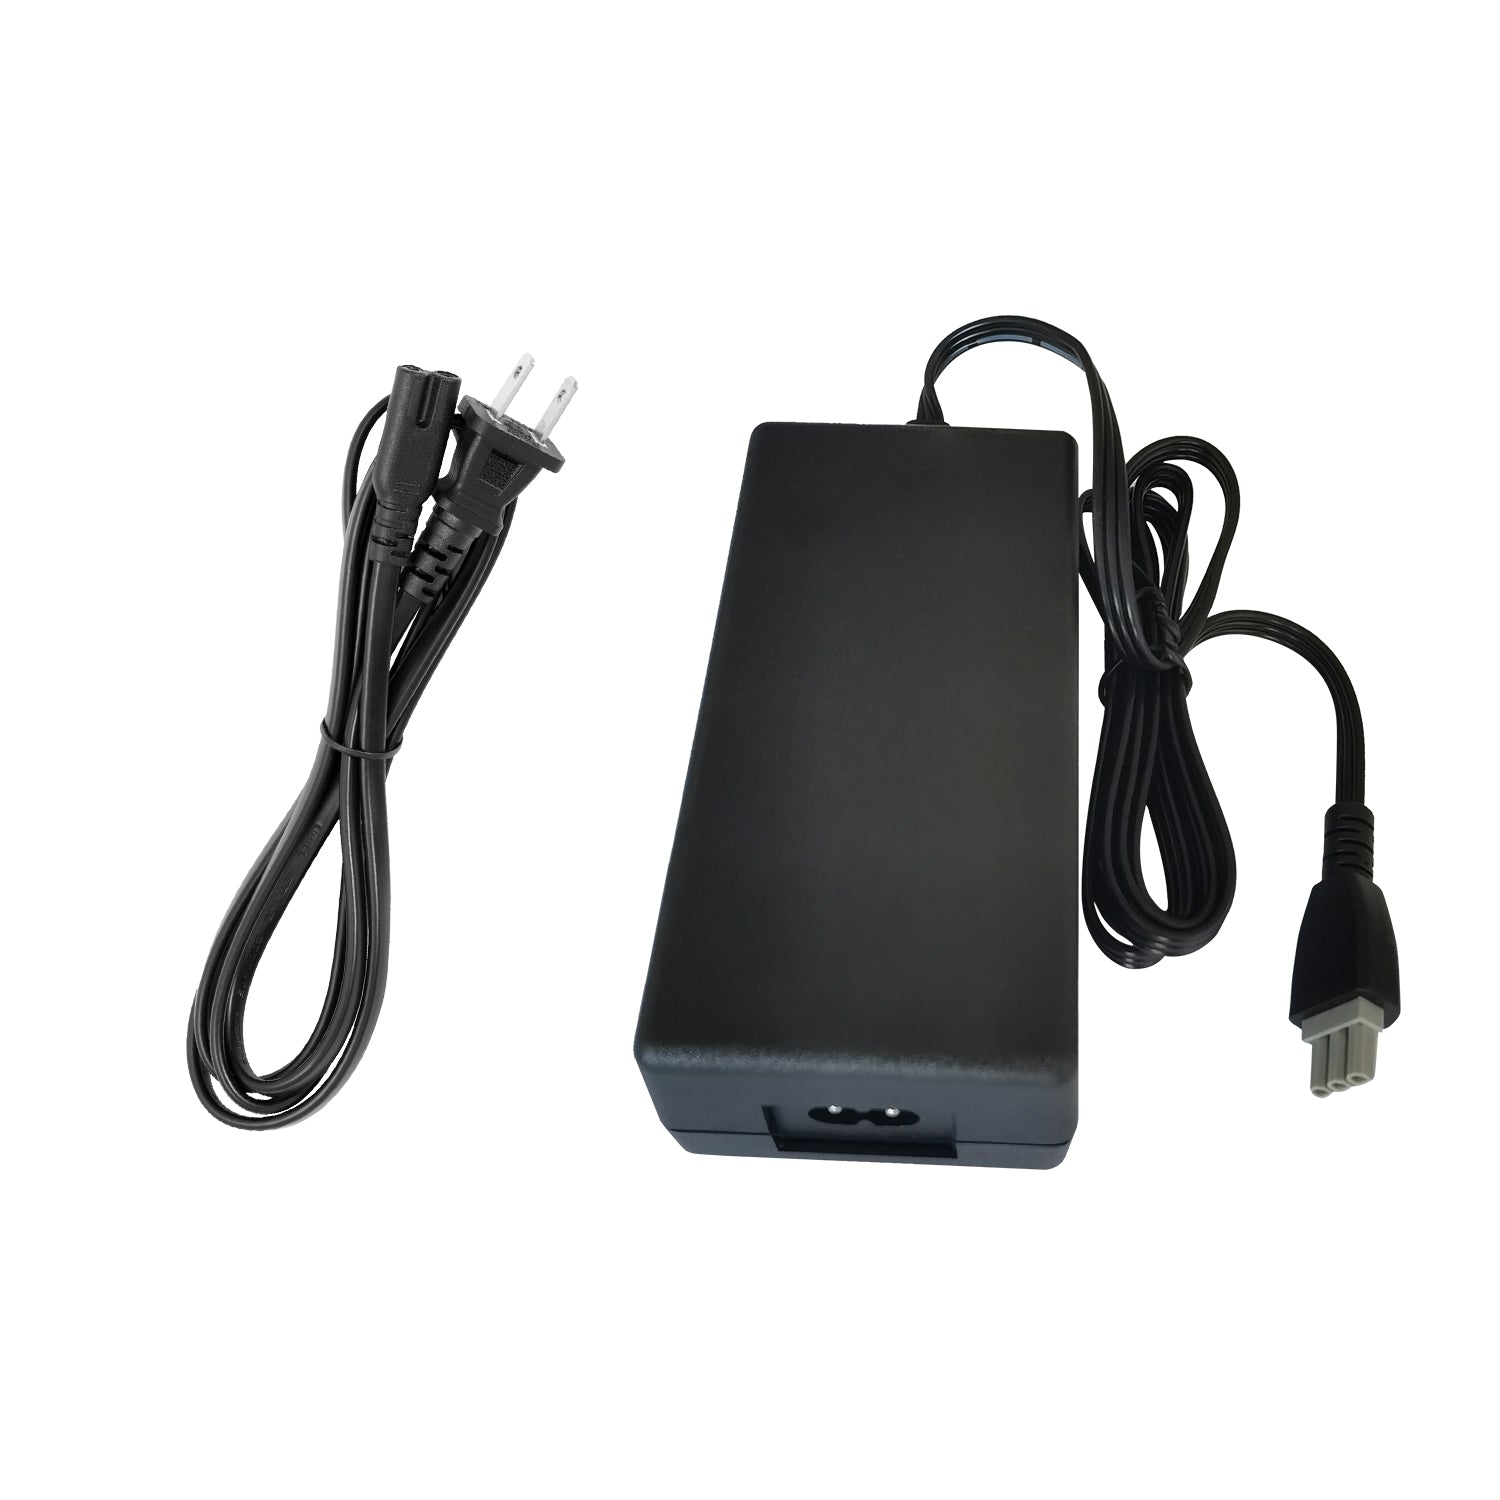 Power Adapter for HP PSC 2310 All-in-One Printer.